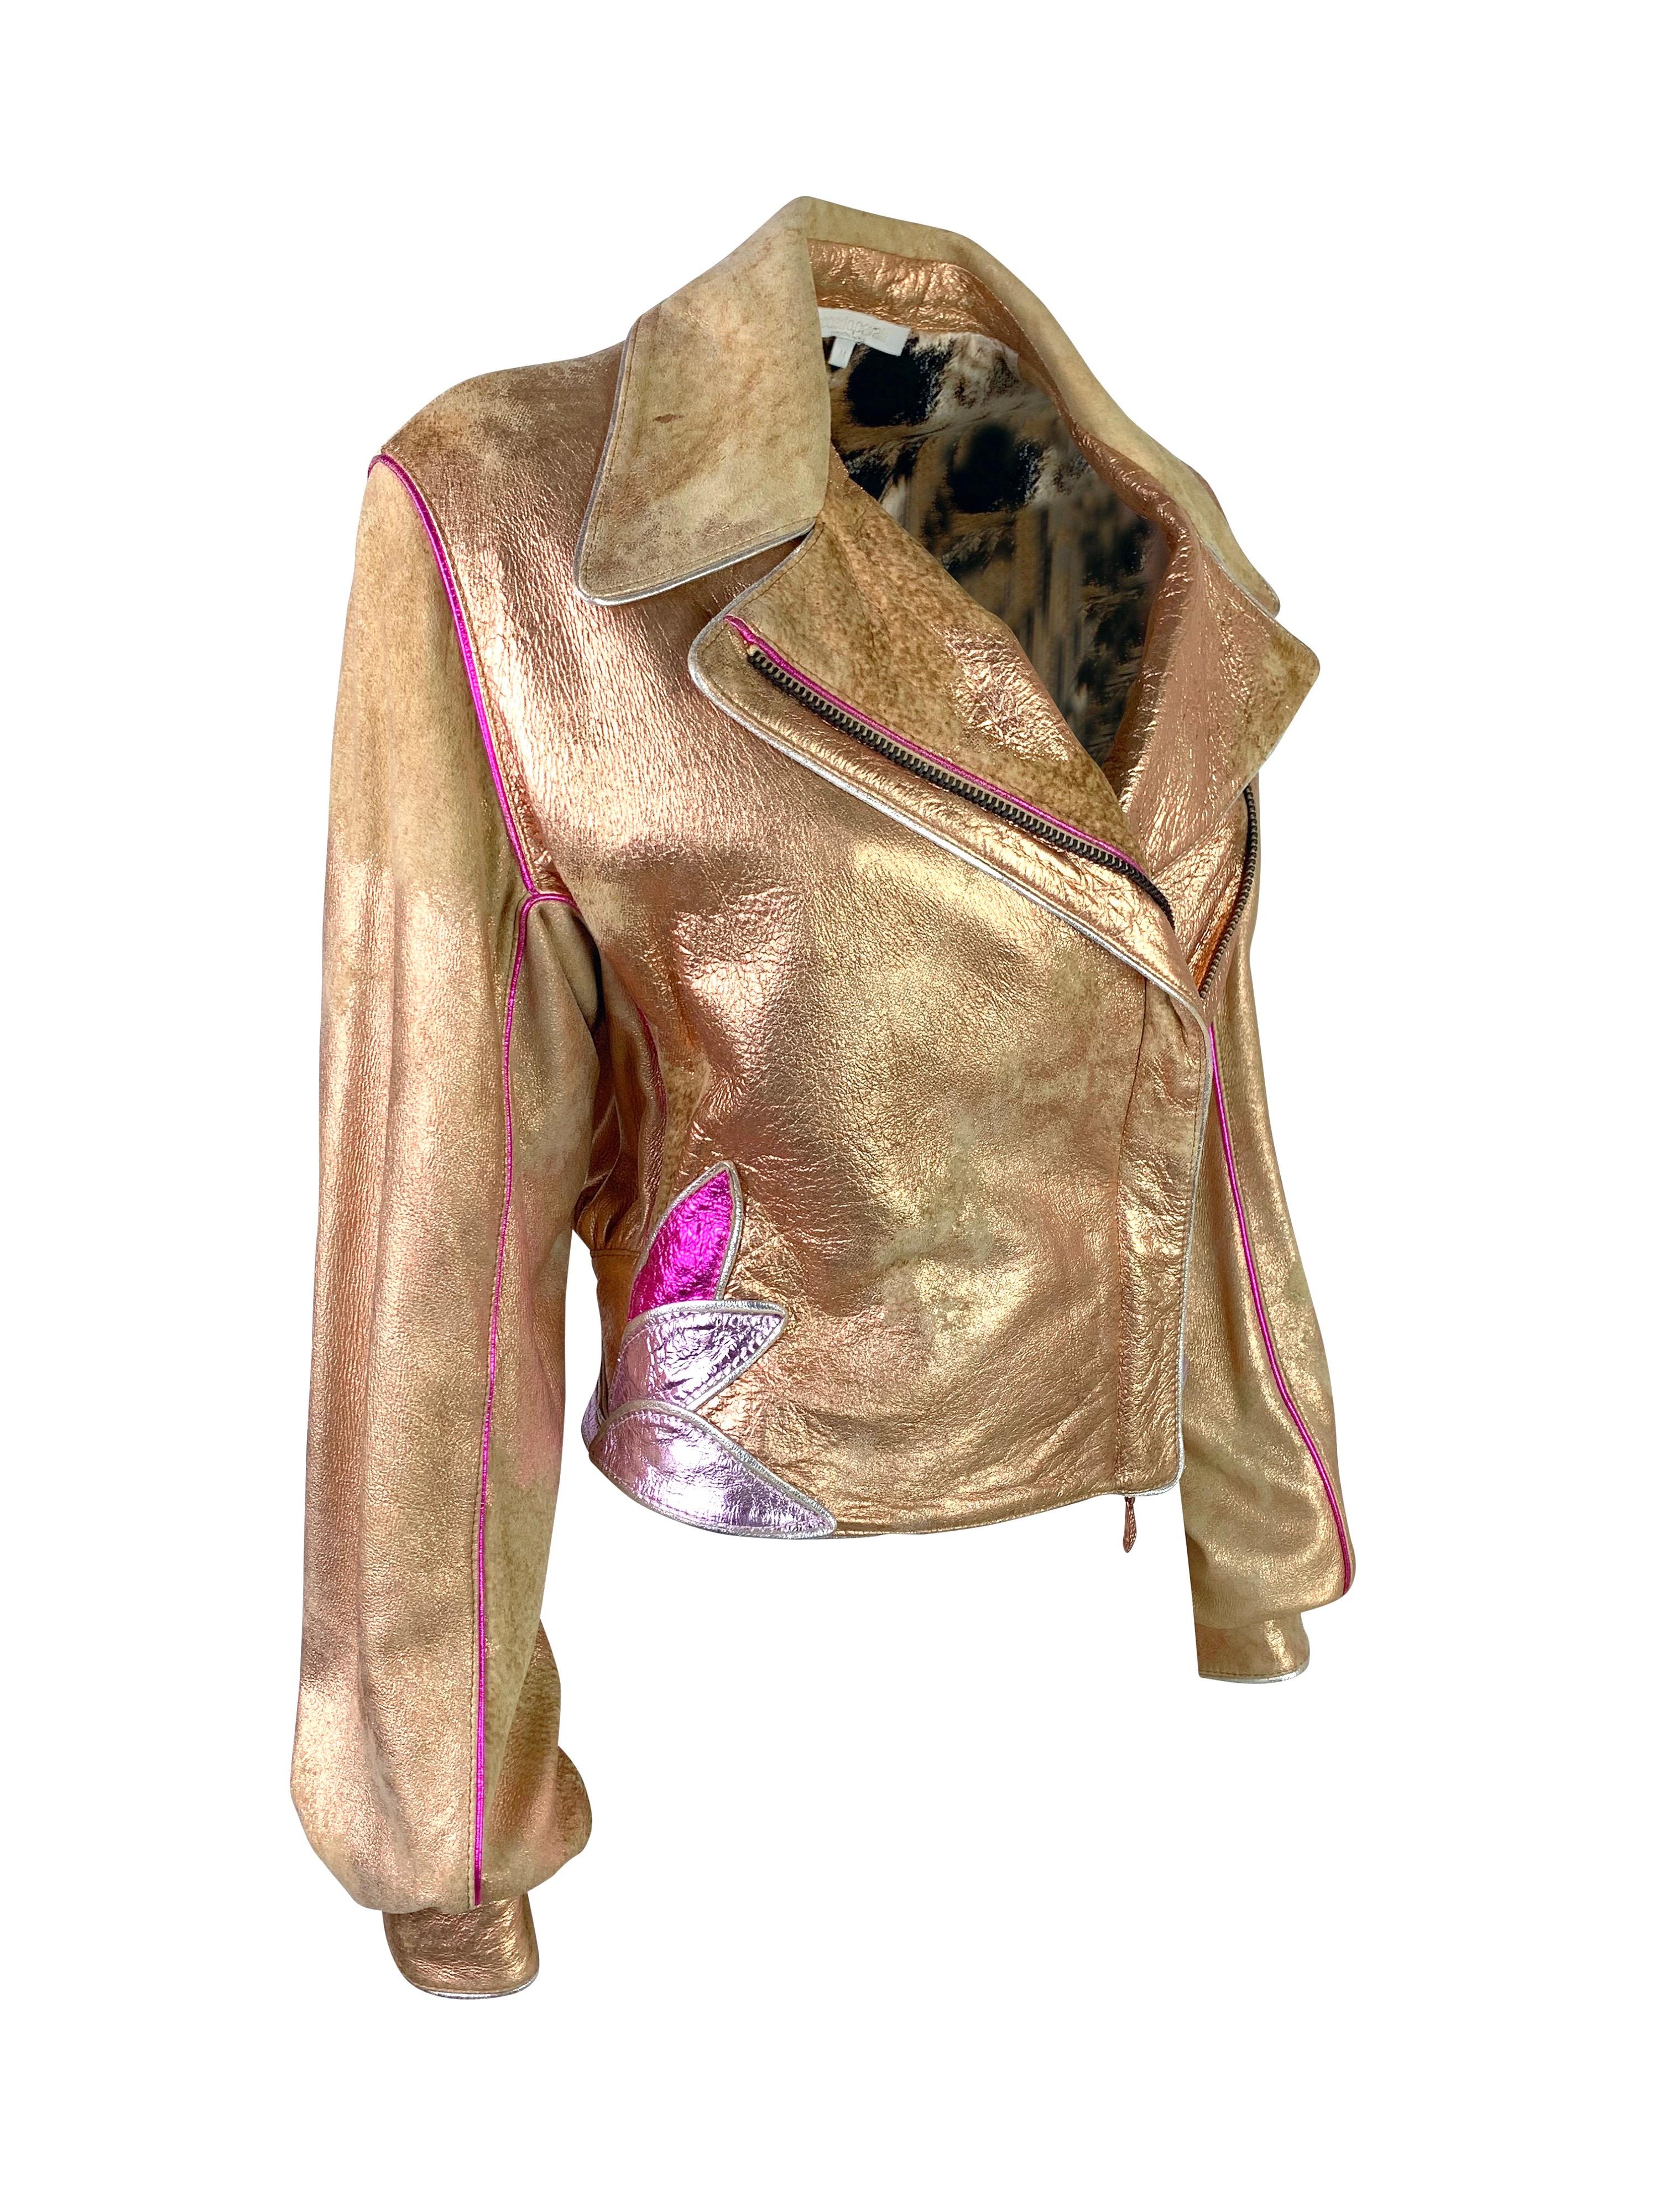 Absolutely stunning leather piece from Cavalli with brushed suede with metallic rose gold finishing.

Size M, but will also fit S thanks the adjustable waist.

Excellent vintage condition, some oxidation on hardware, non-obtrusive